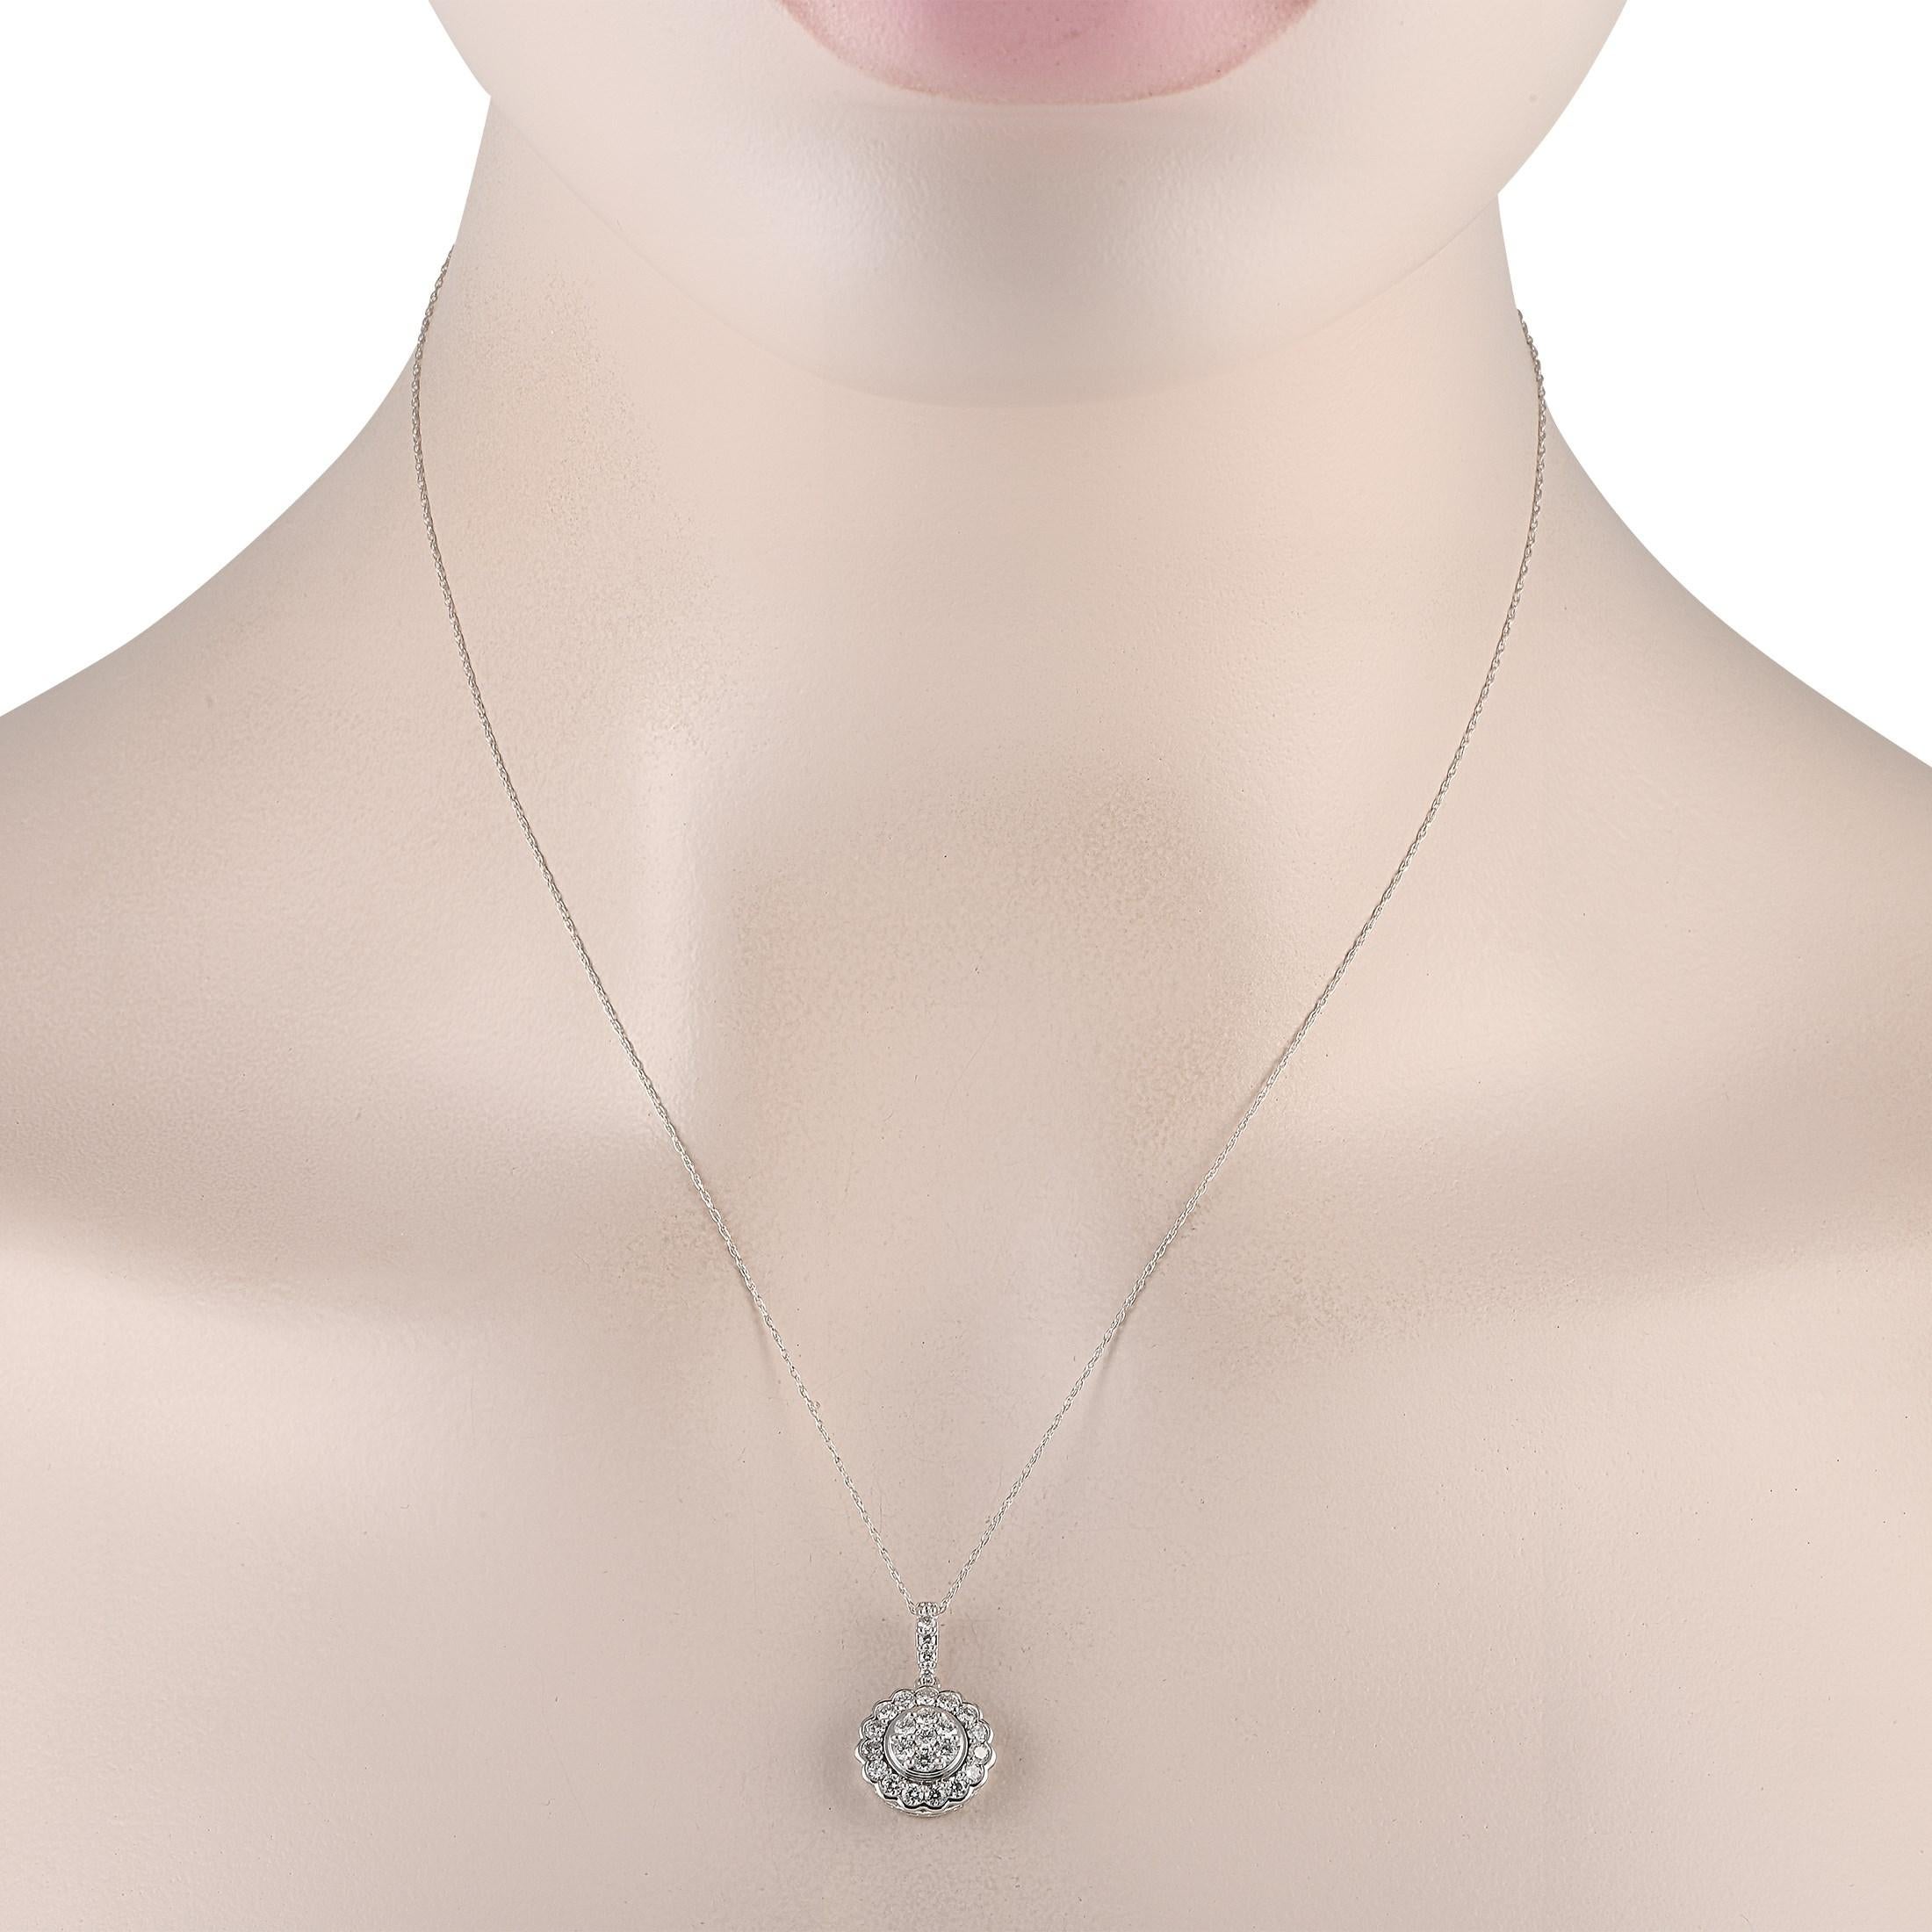 This charming stunner is perfect for all-day wear. The necklace has an 18 chain in 14K white gold fastened by a spring ring clasp. The 0.85 by 0.50 pendant features a central disc embellished with round diamonds. A floral-inspired halo dotted with